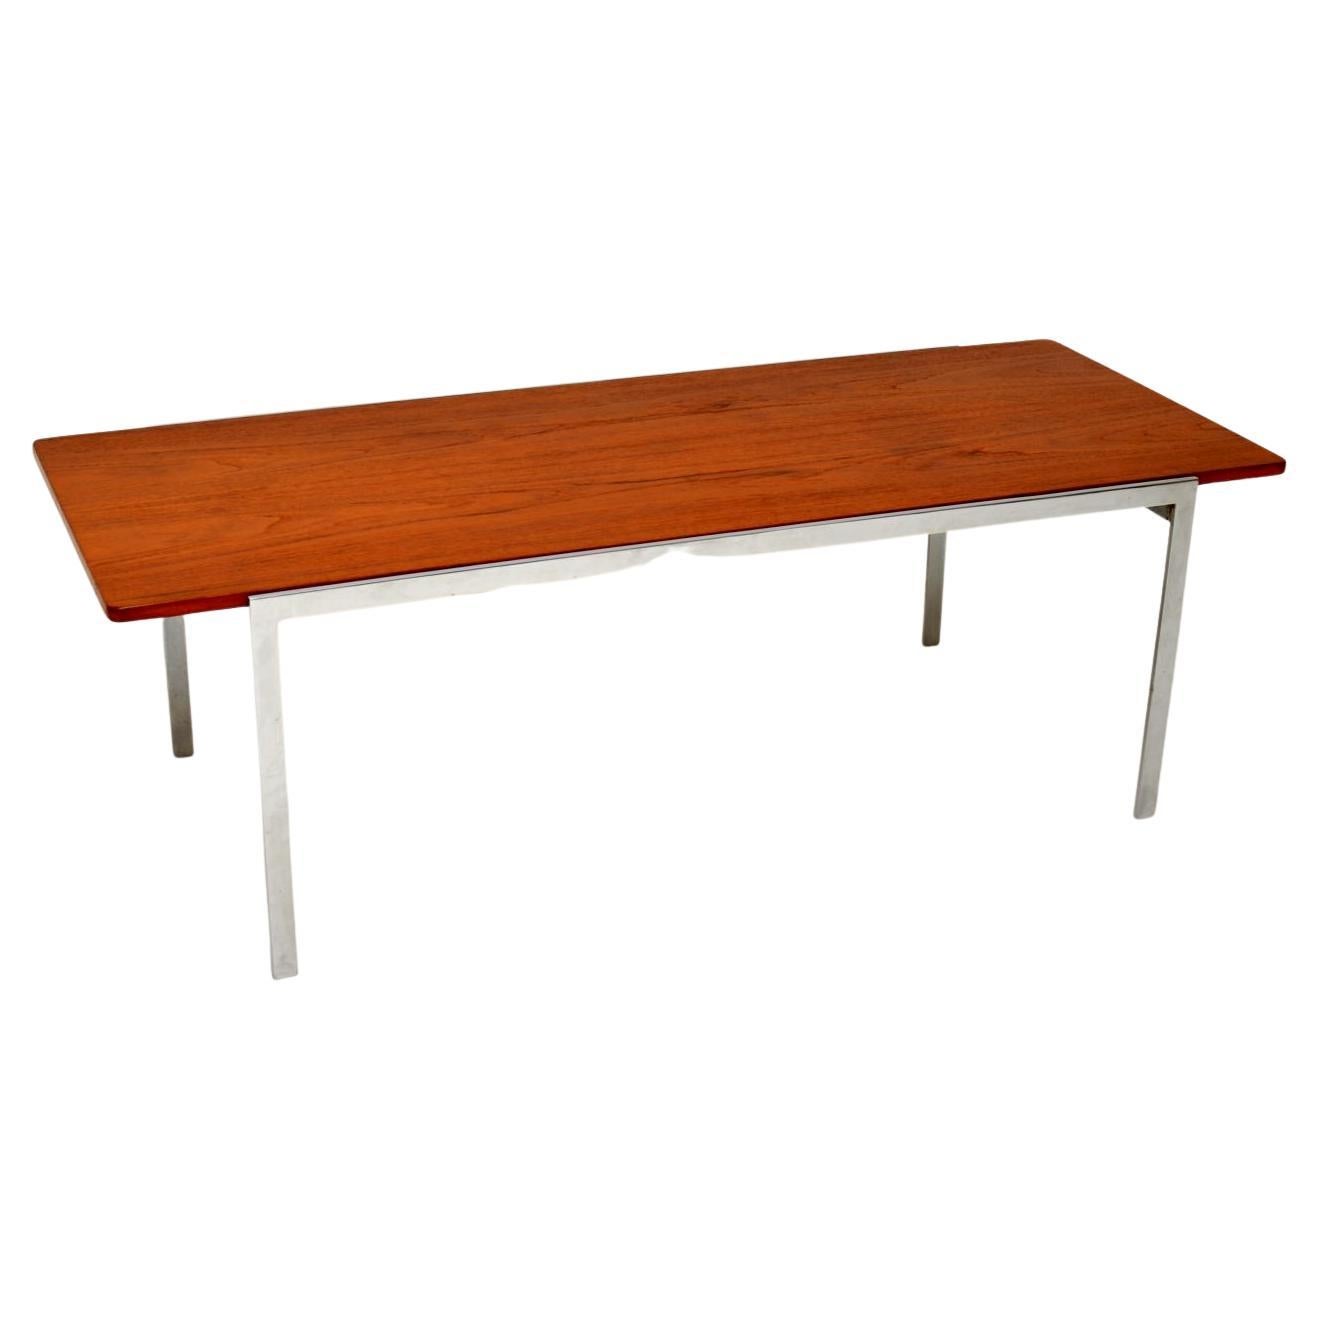 Danish Vintage Teak and Chrome Coffee Table by Arne Jacobsen For Sale